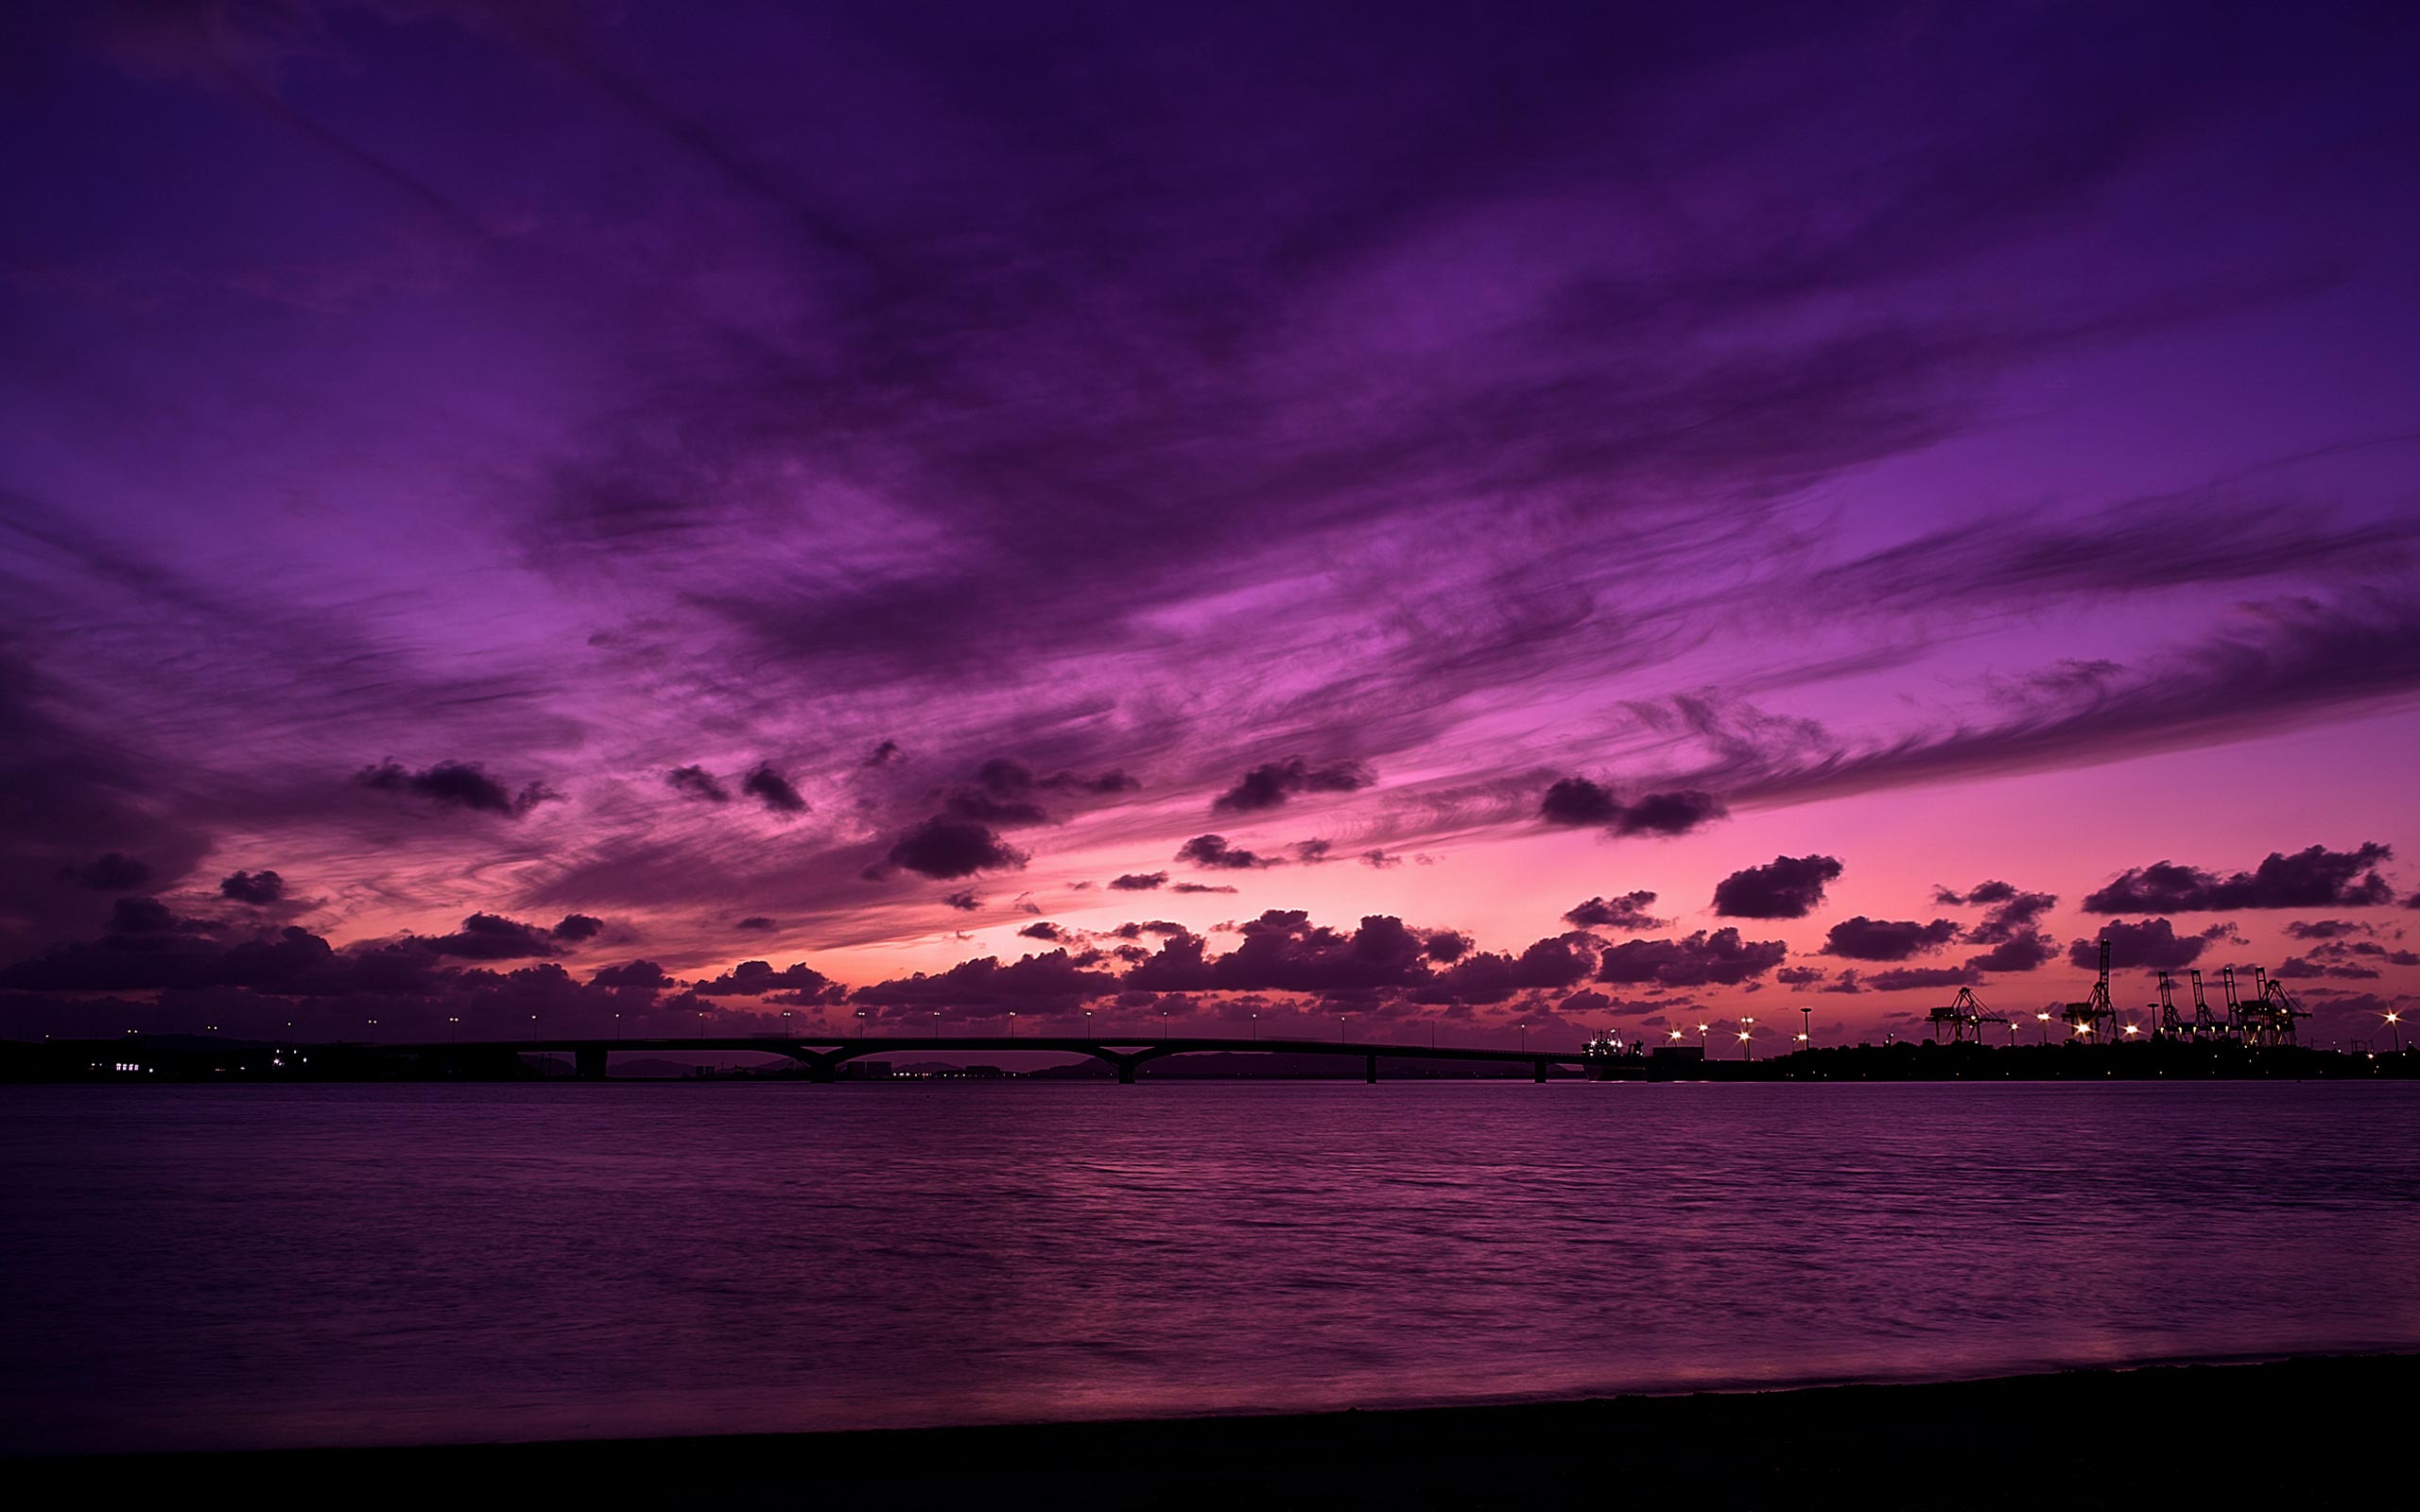  Purple Scenic Wallpapers Download at WallpaperBro